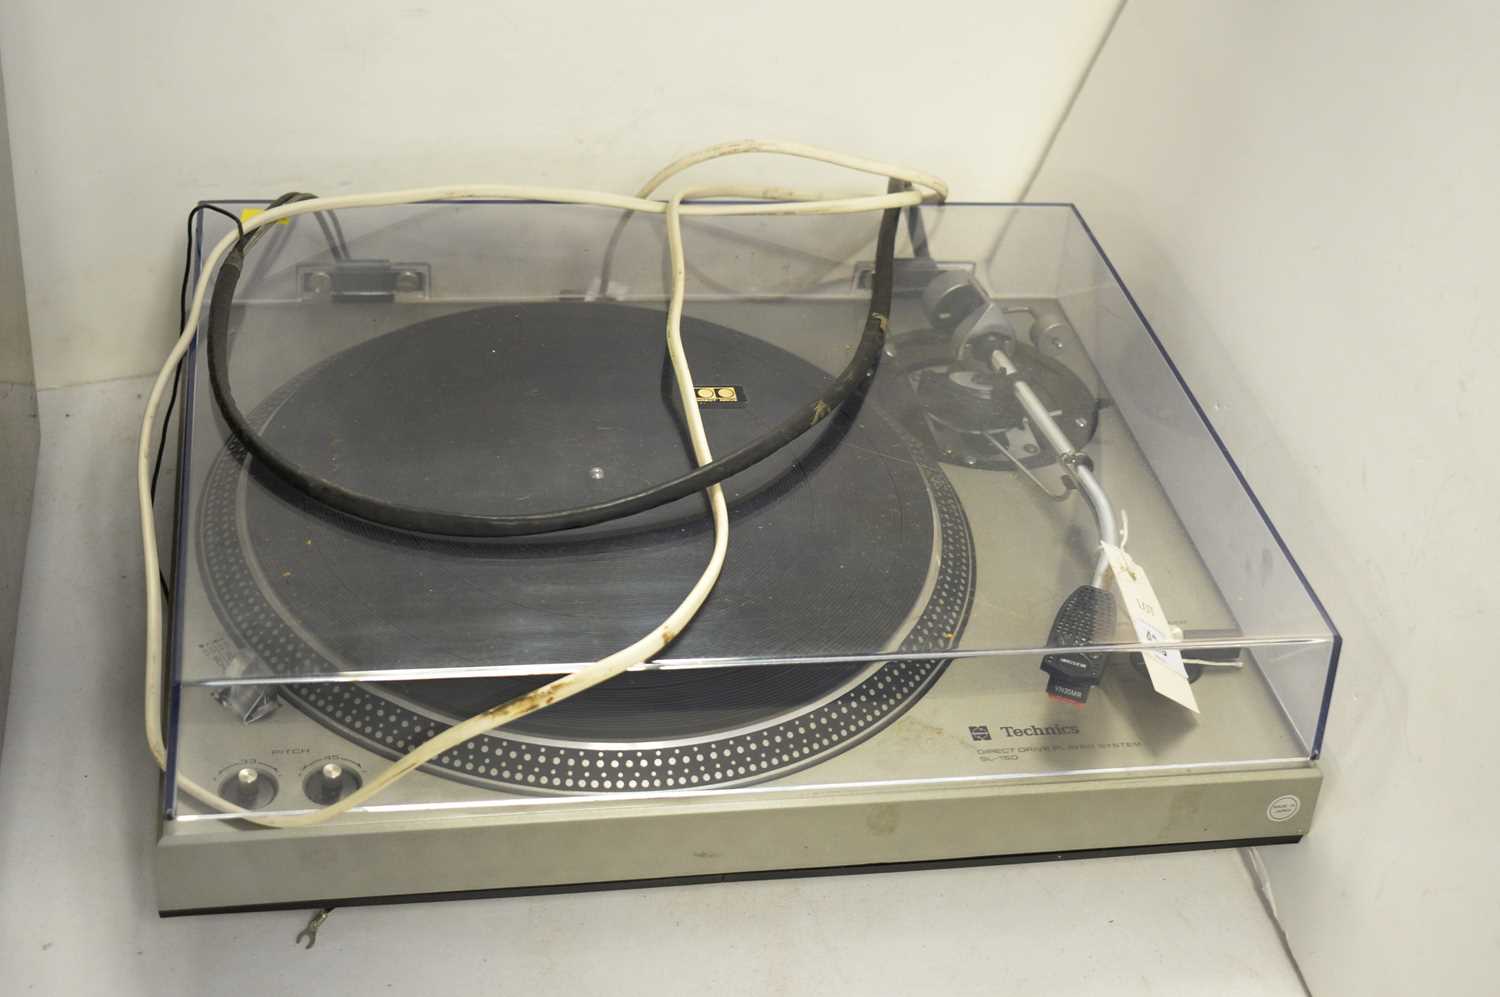 A Technics Direct Drive Player System SL-150 turntable